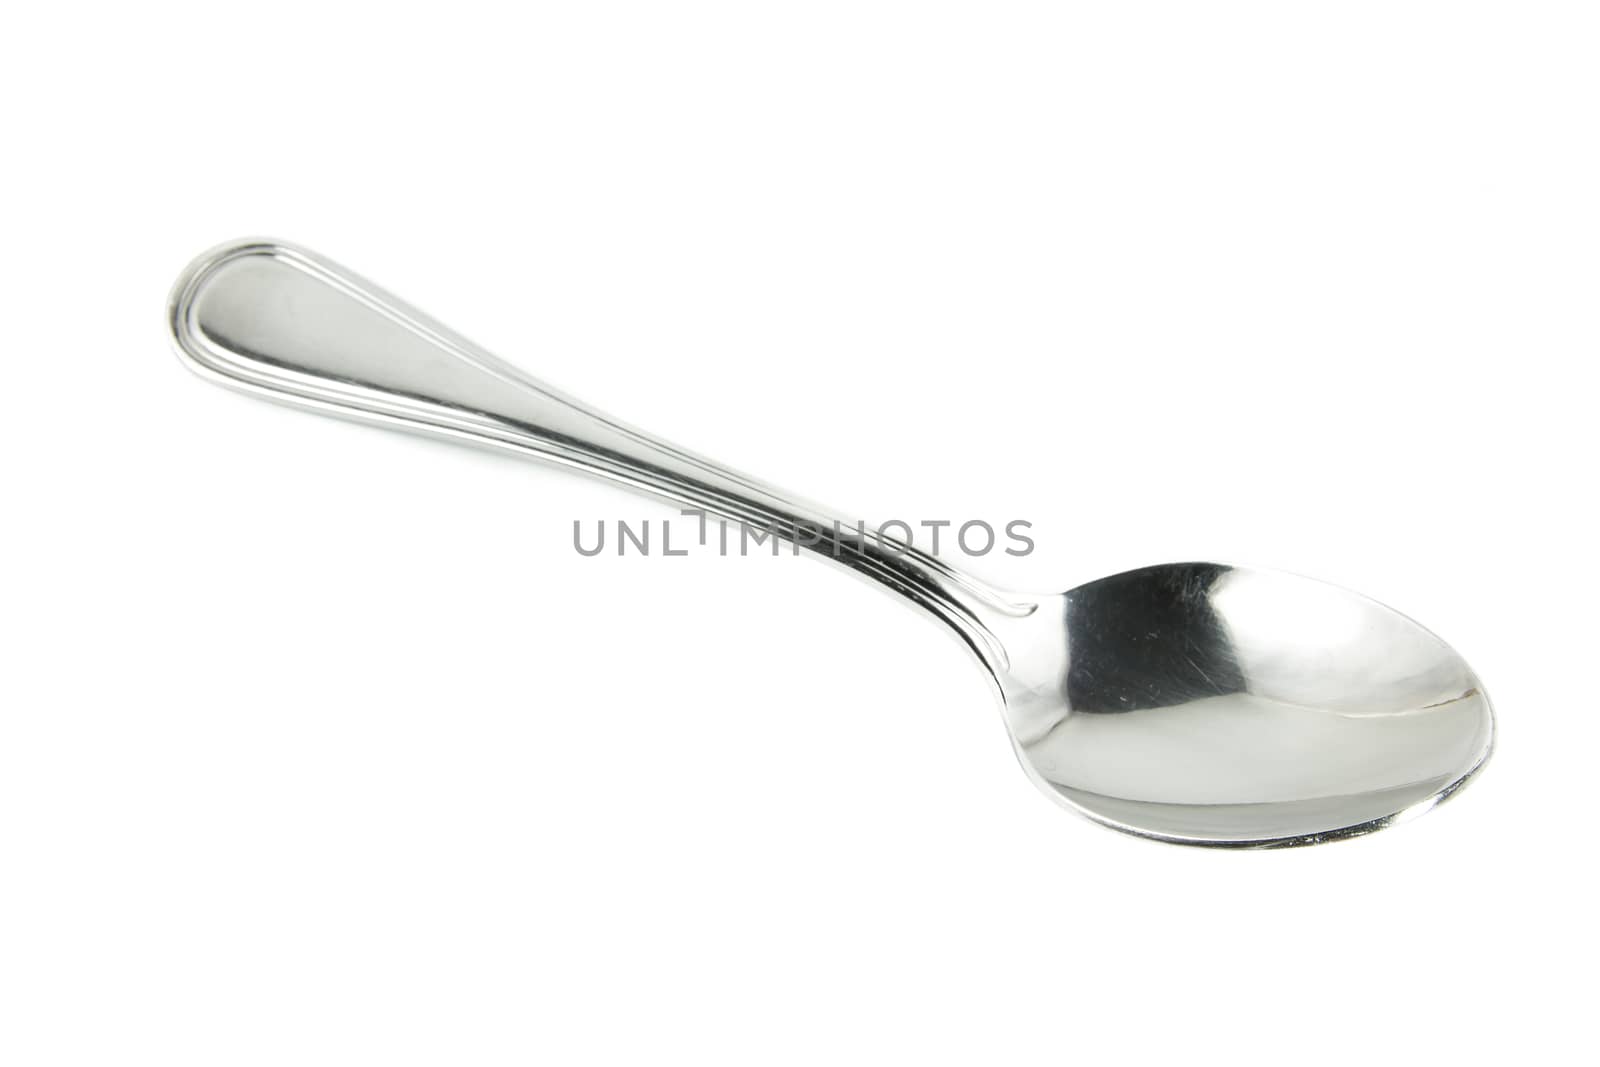 Closeup view of spoon isolated on white background